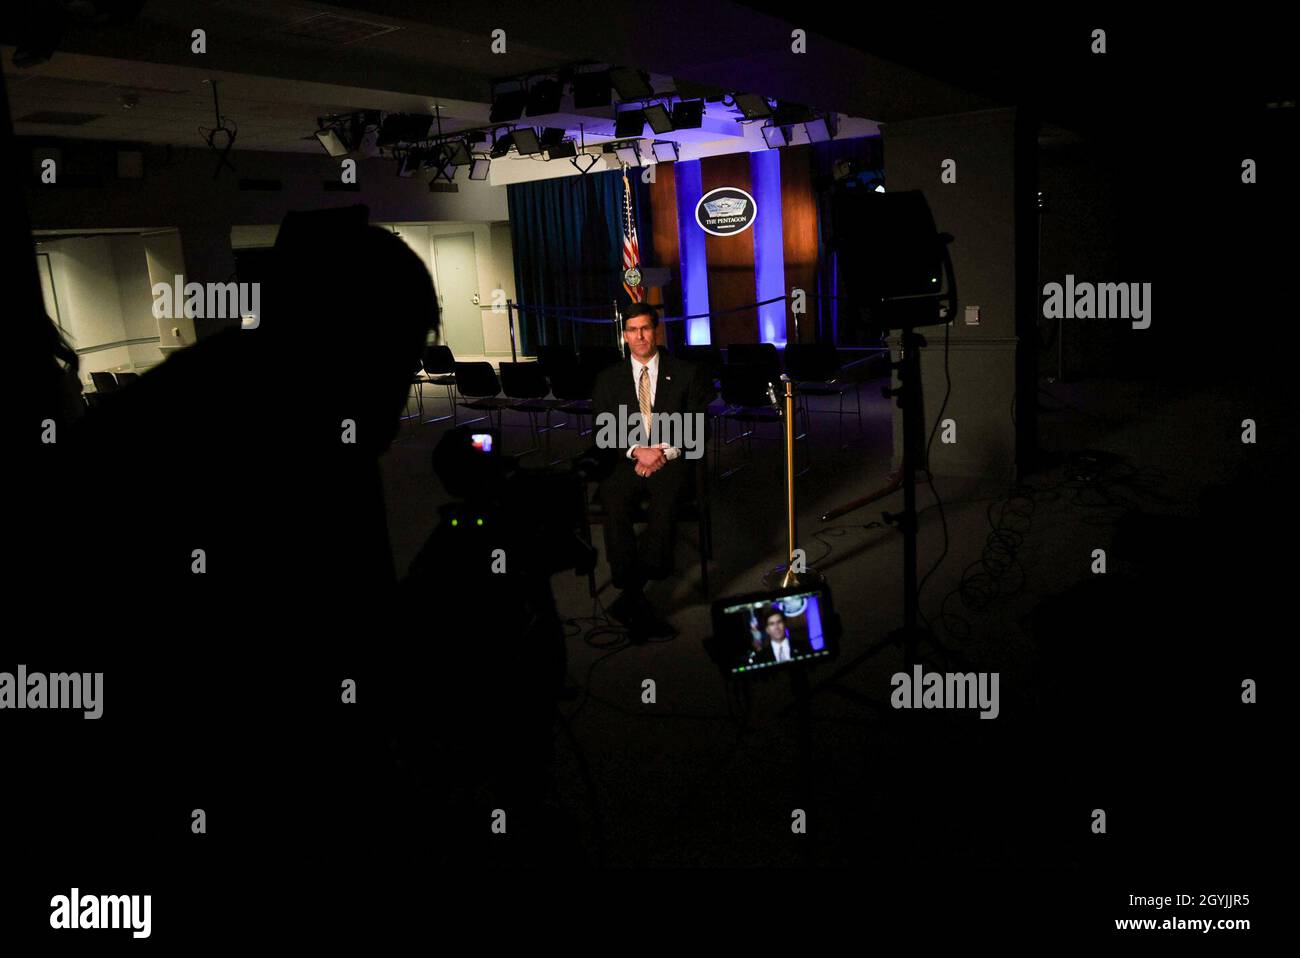 Defense Secretary Mark T. Esper sits for a video interview with CNN International's Christiane Amanpour, at the Pentagon, Washington, D.C., Jan. 7, 2020. (DoD photo by Navy Petty Officer 2nd Class James K. Lee) Stock Photo